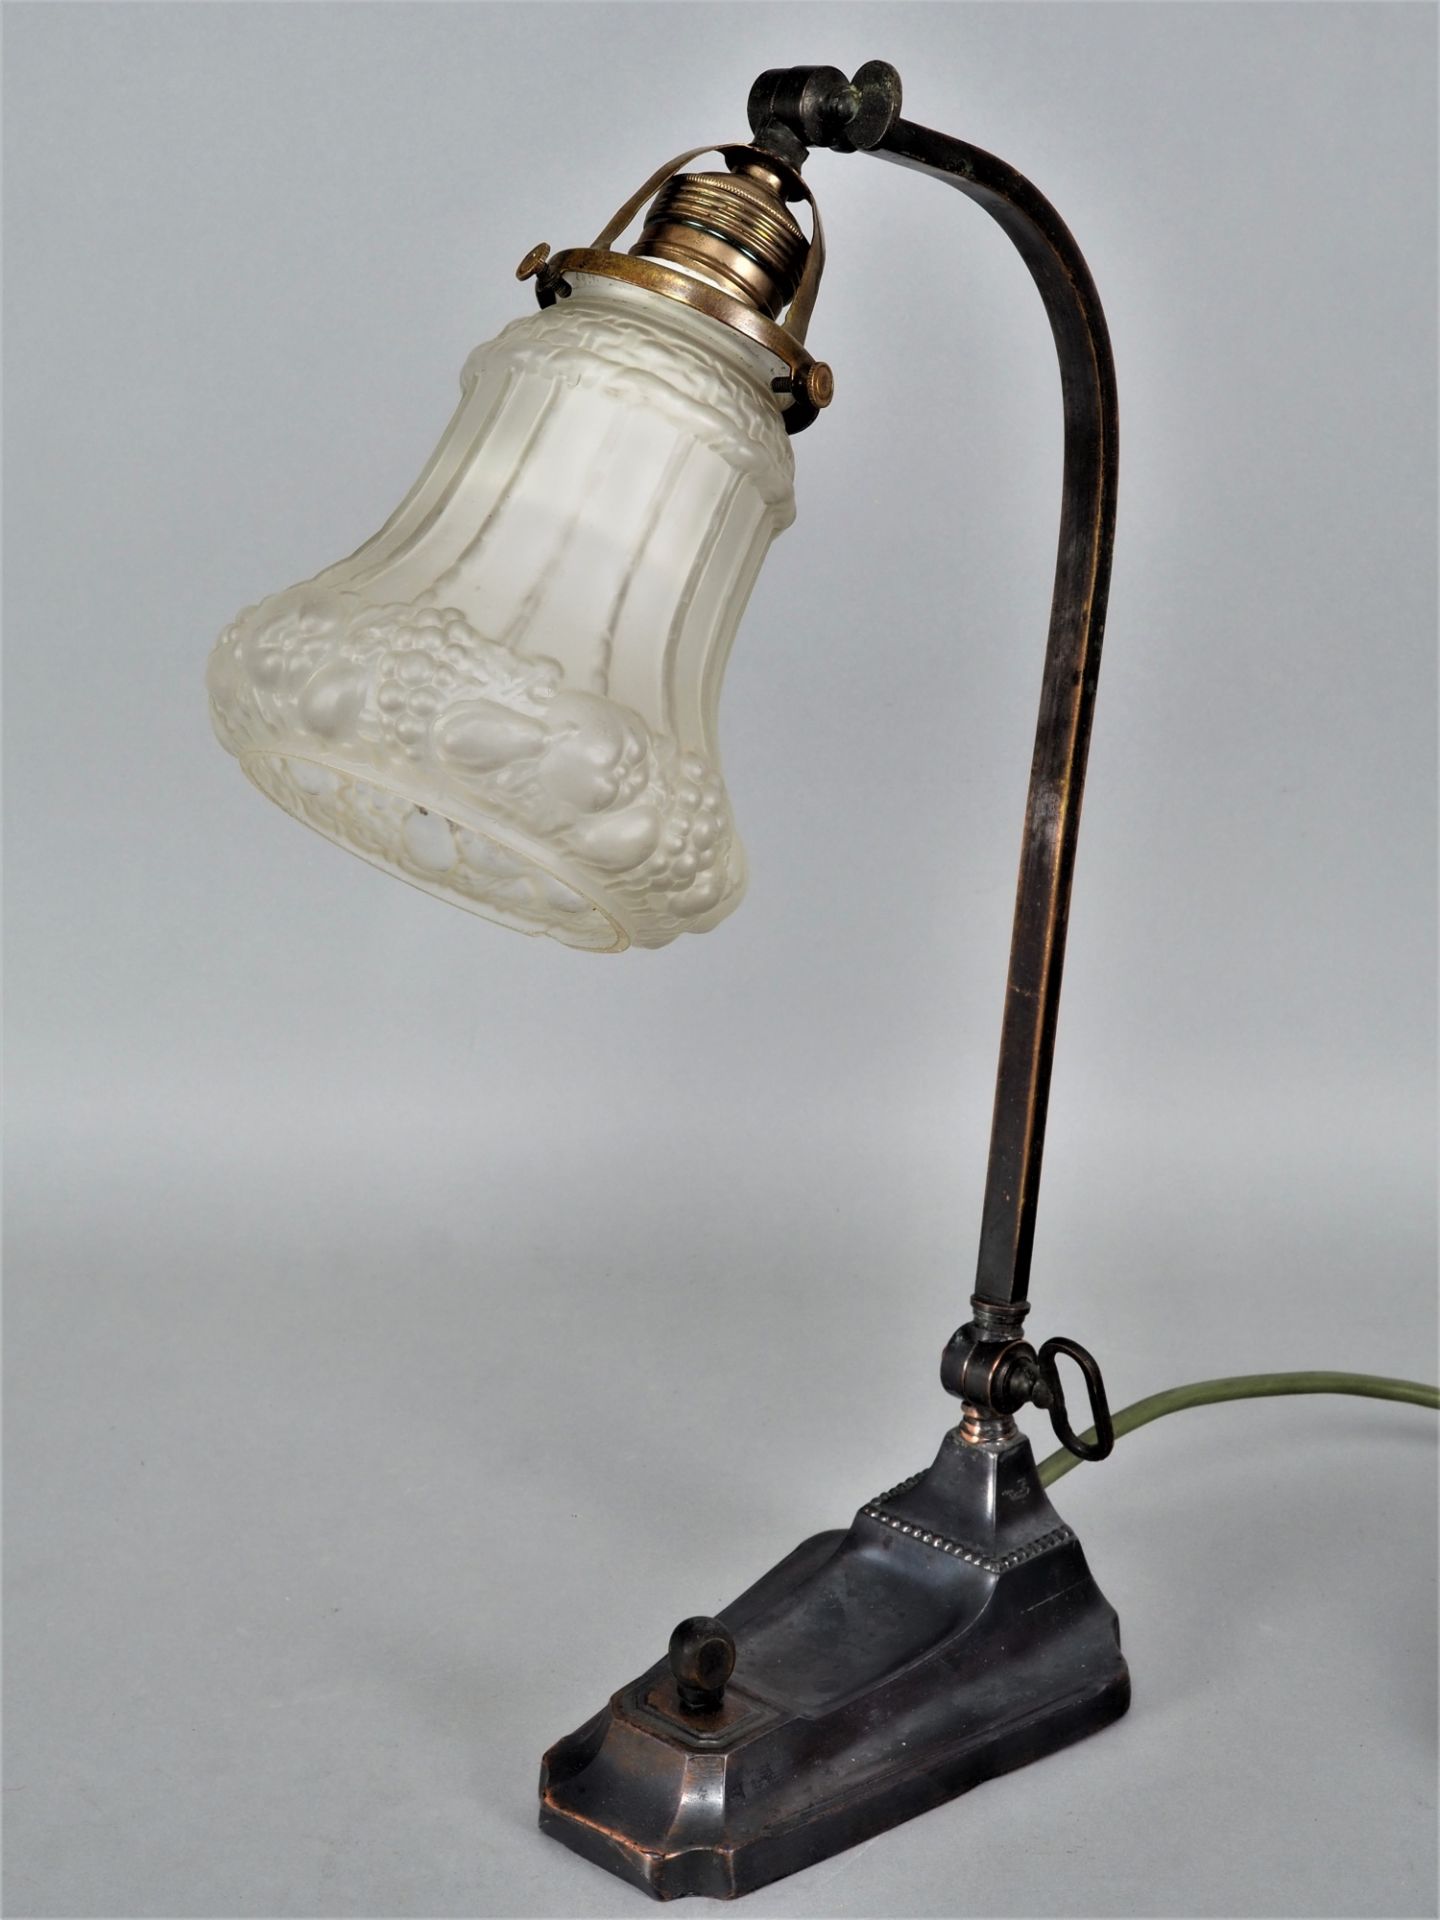 Art Nouveau table lamp around 1900 - Image 2 of 2